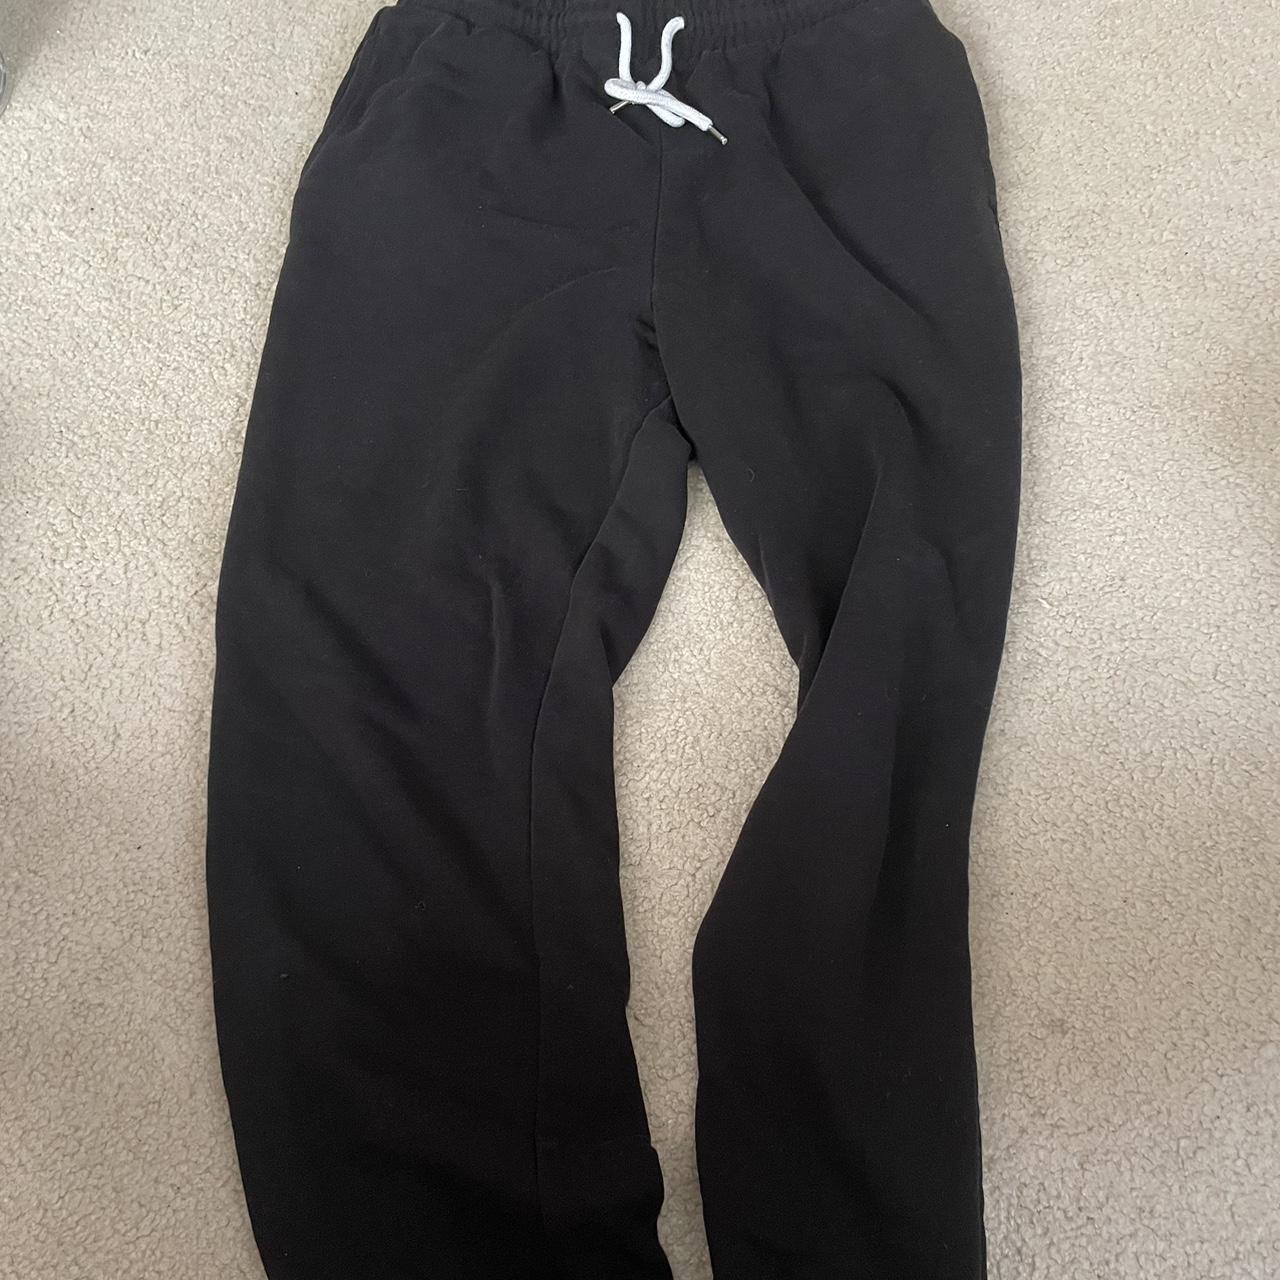 Forever 21 Womens Sweatpants Black Size Small Joggers Drawstring